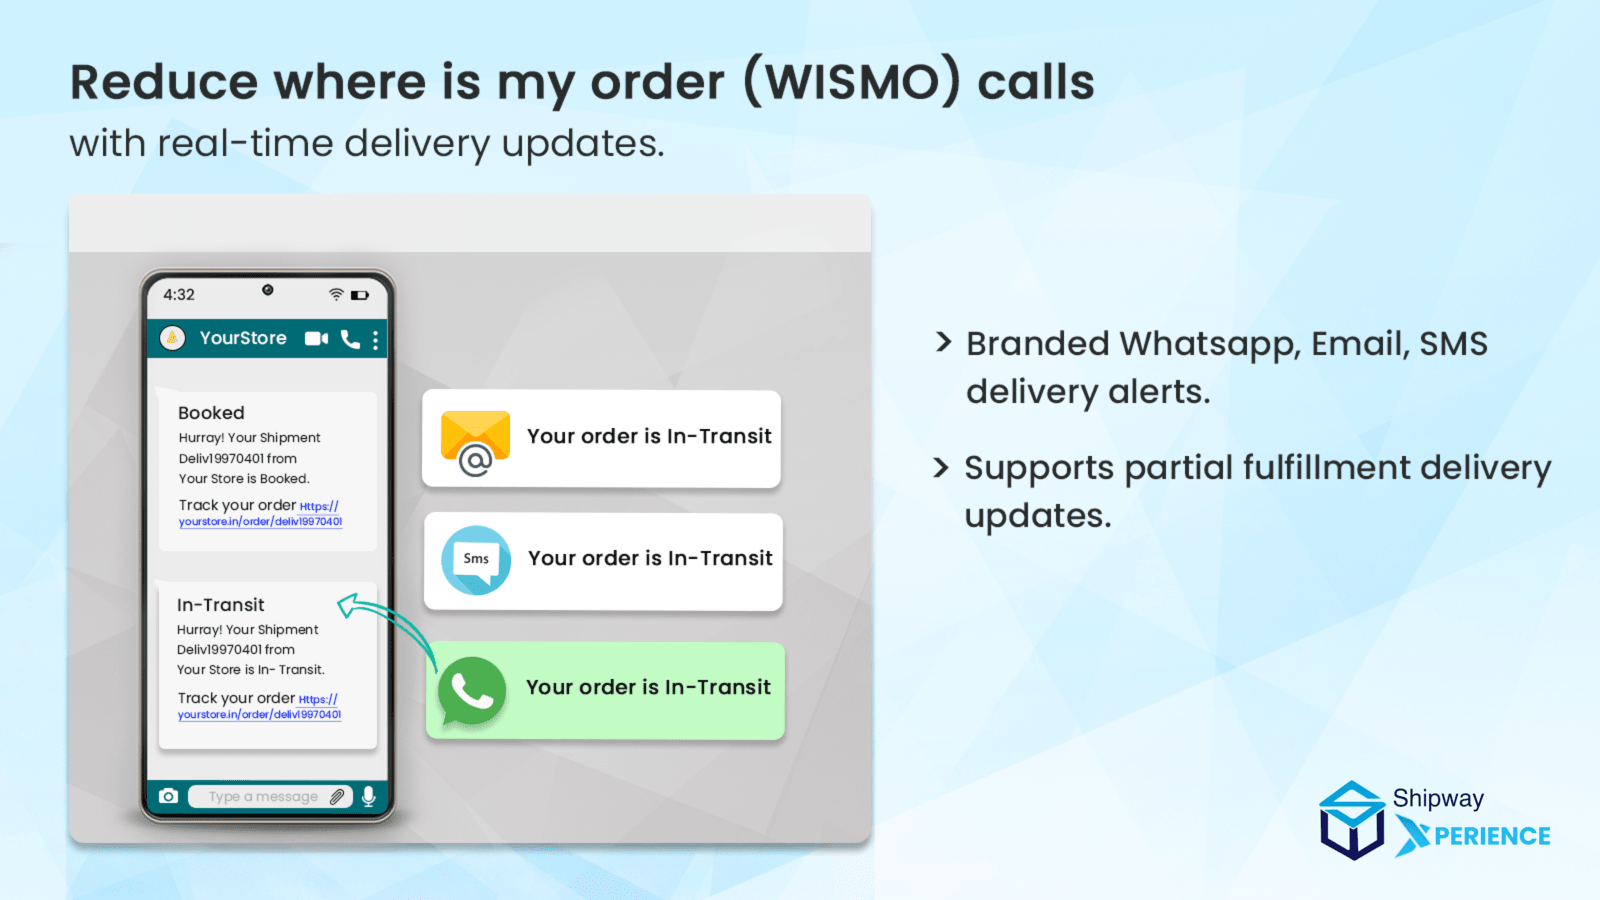 Whatsapp, SMS & Email Delivery alerts